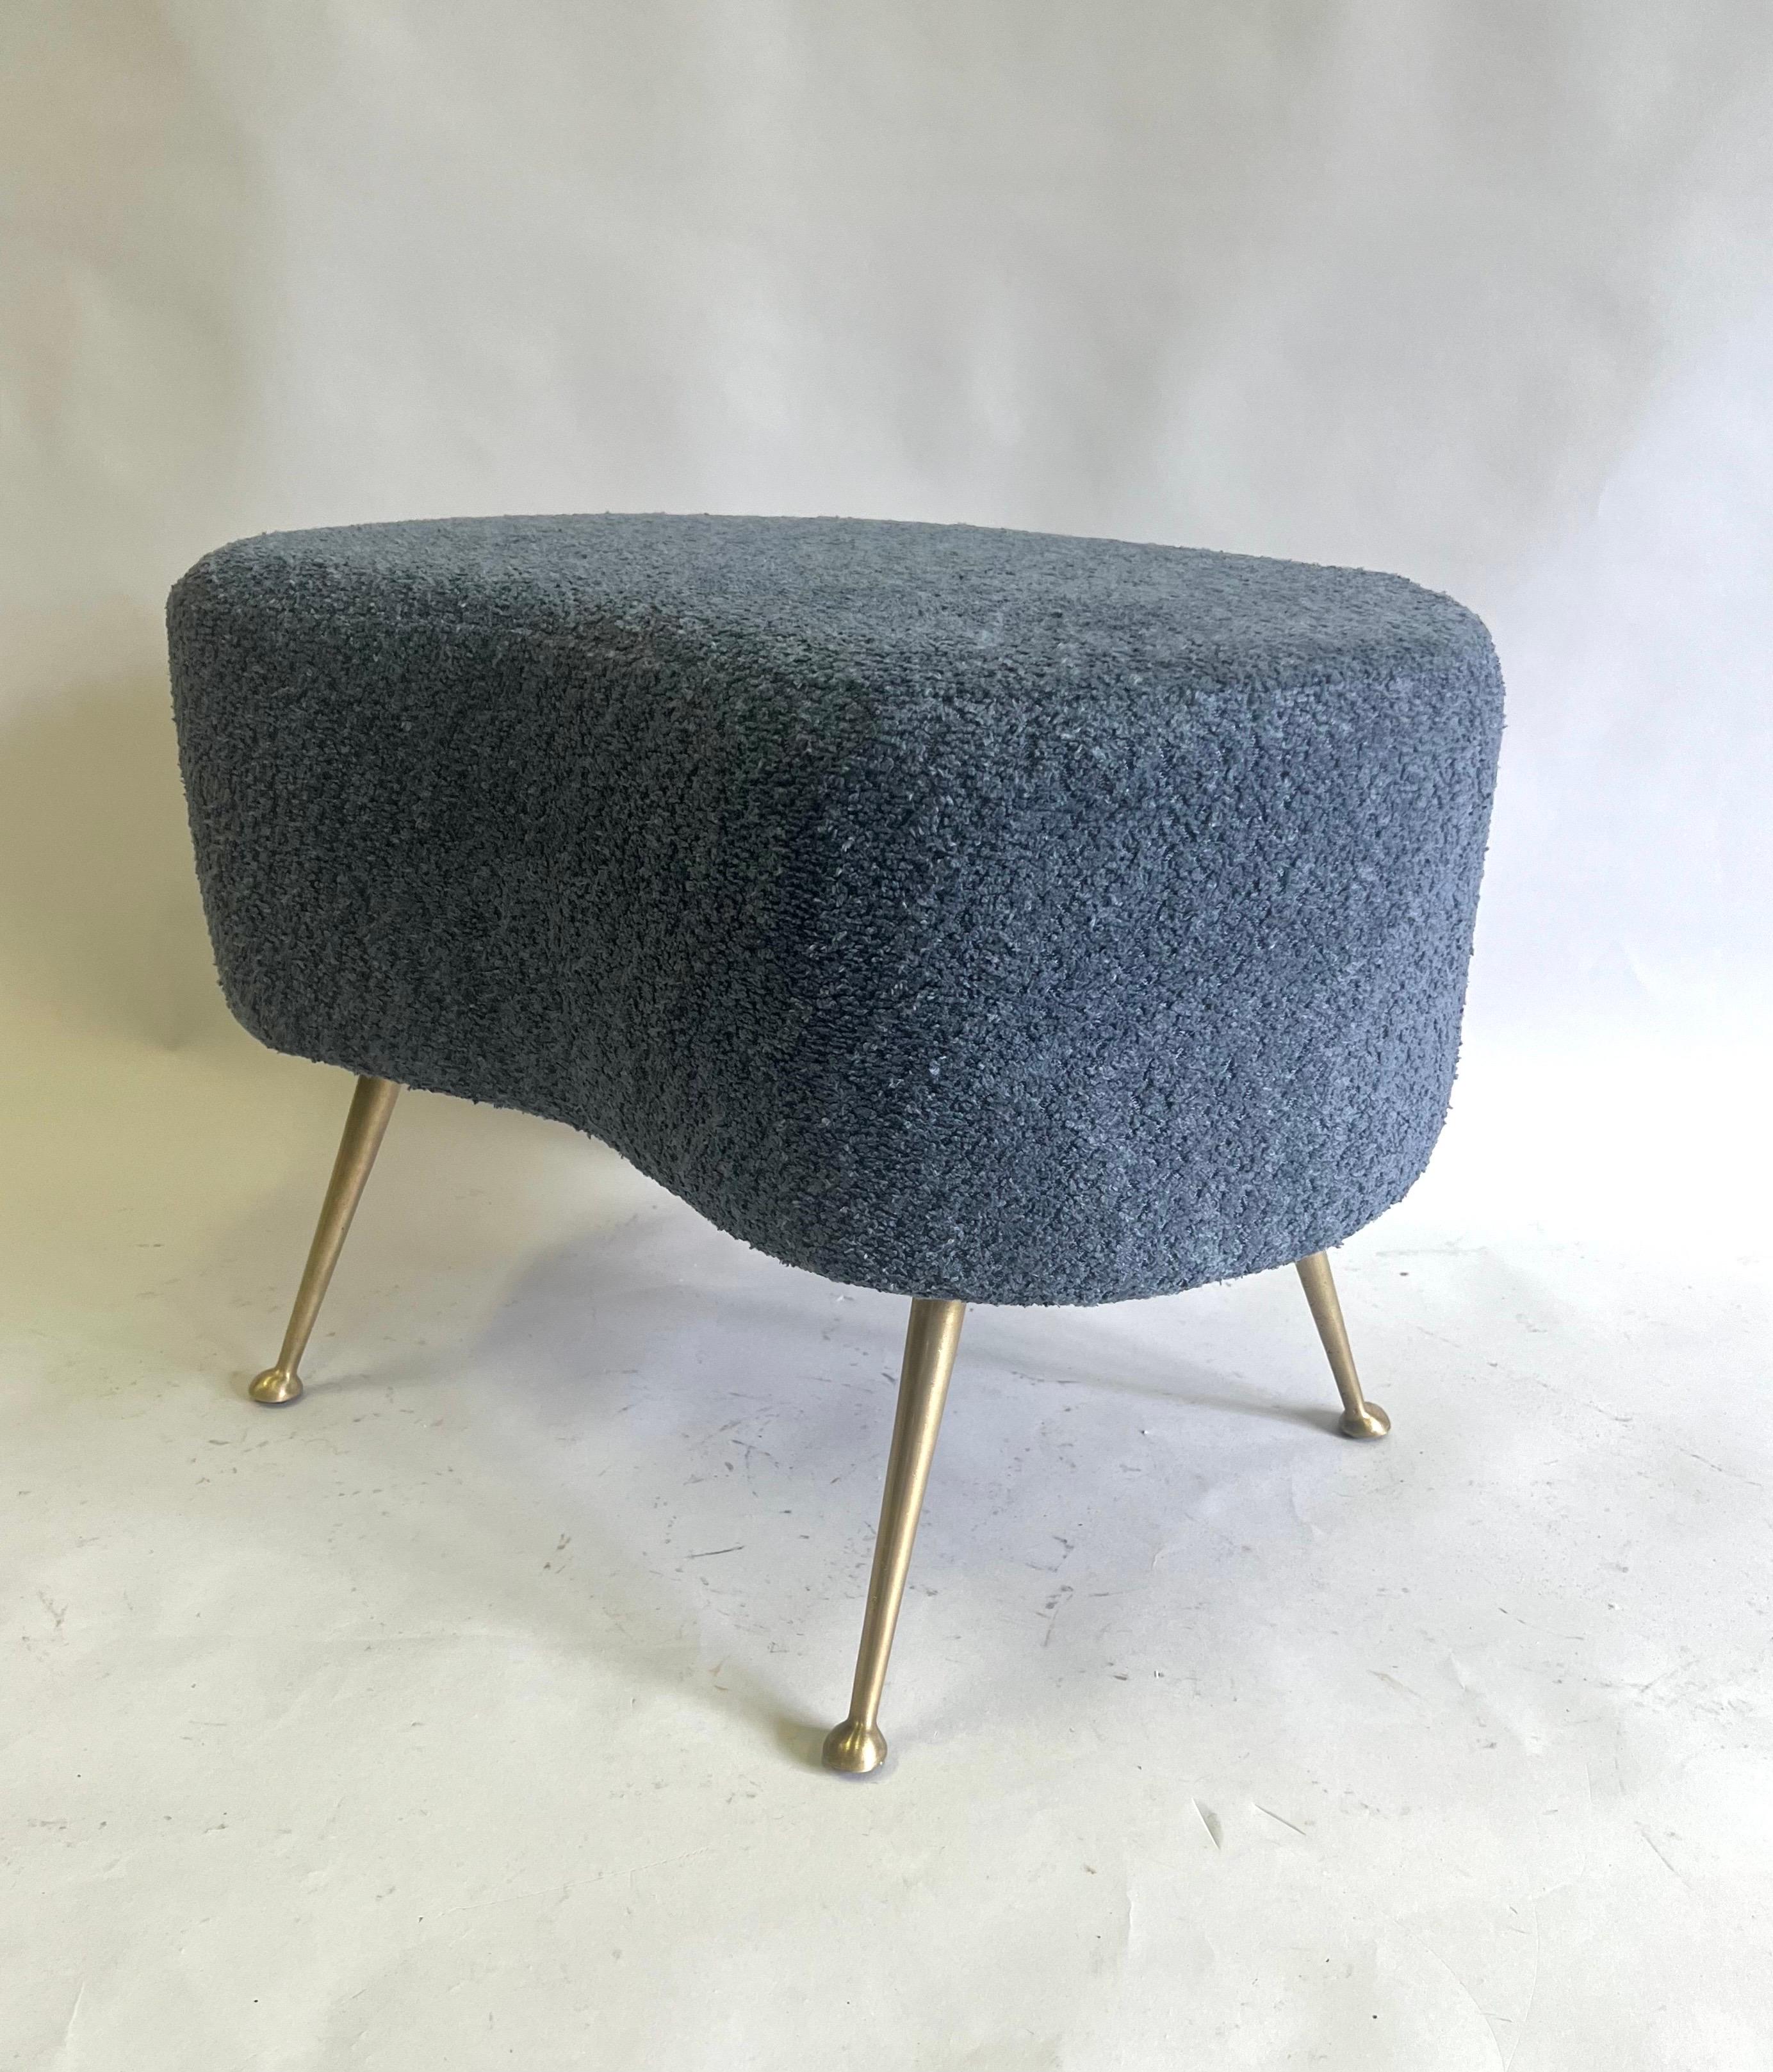 Pair of Italian Mid-Century Organic Modern Stools attributed to Marco Zanuso For Sale 11